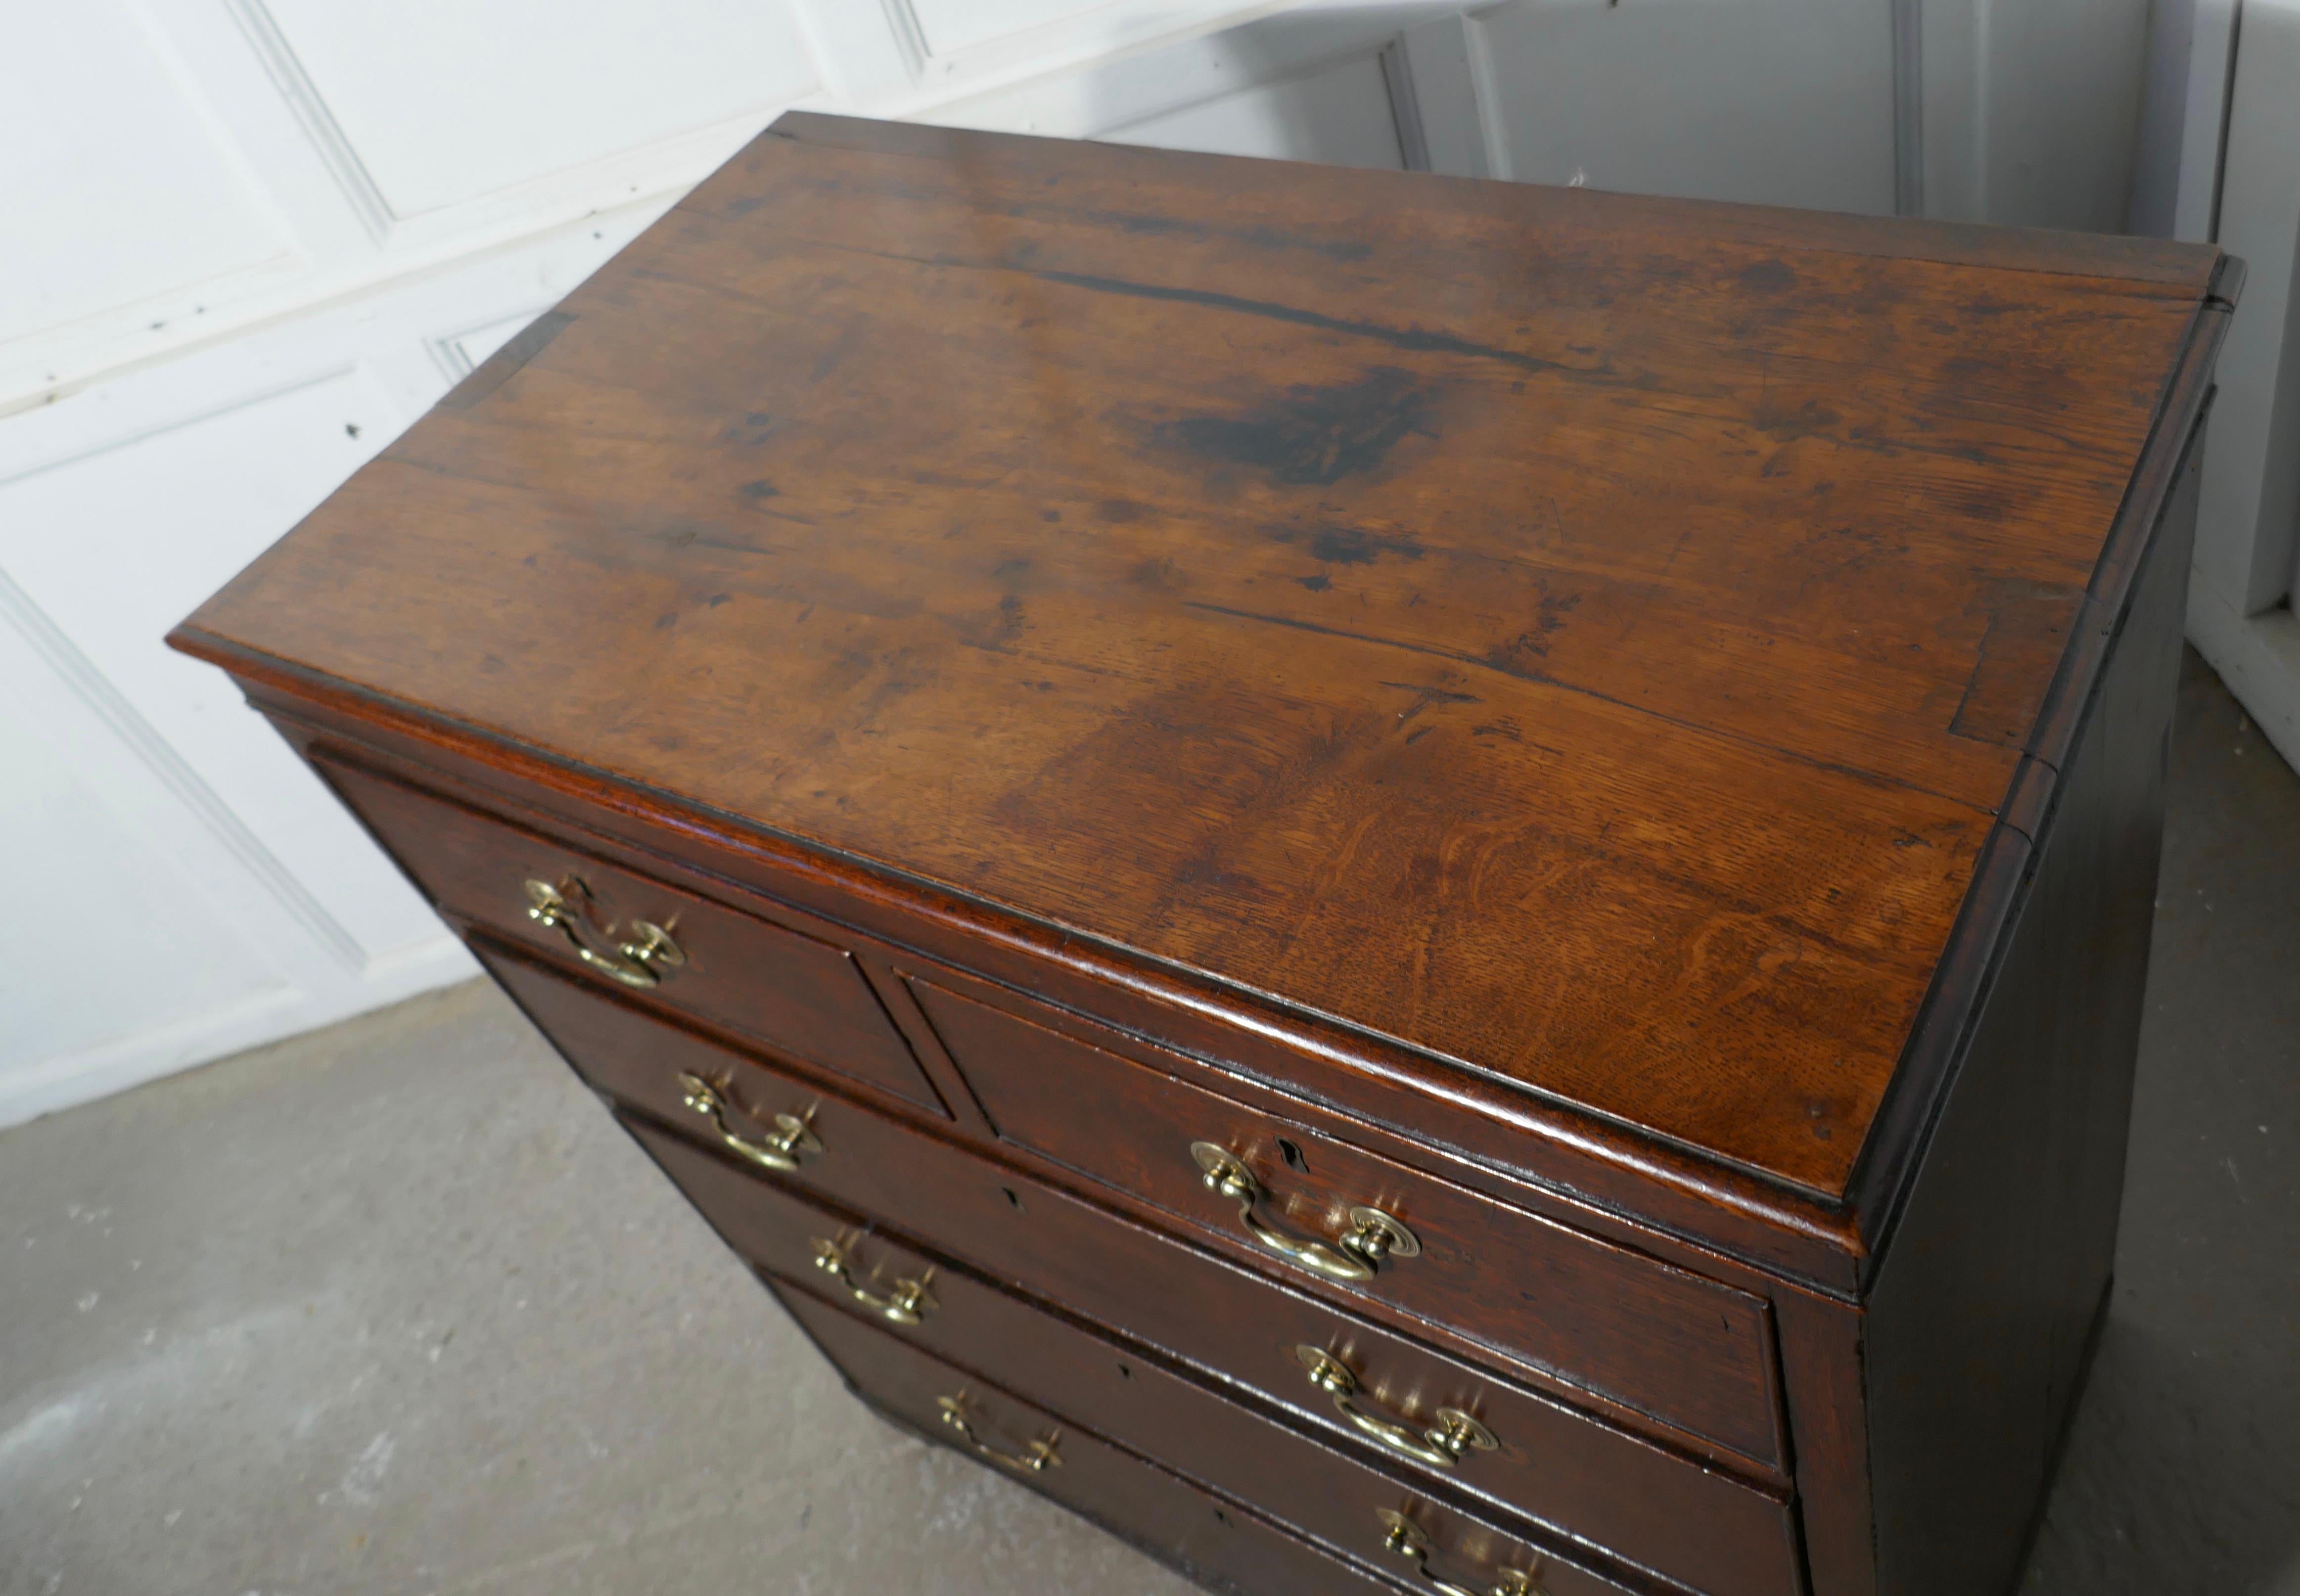 This charming old oak Georgian chest of drawers started life as a book press sadly the press which would have been on the top of the chest has long gone
The chest has two short drawers at the top and three longer graduated drawers beneath and it